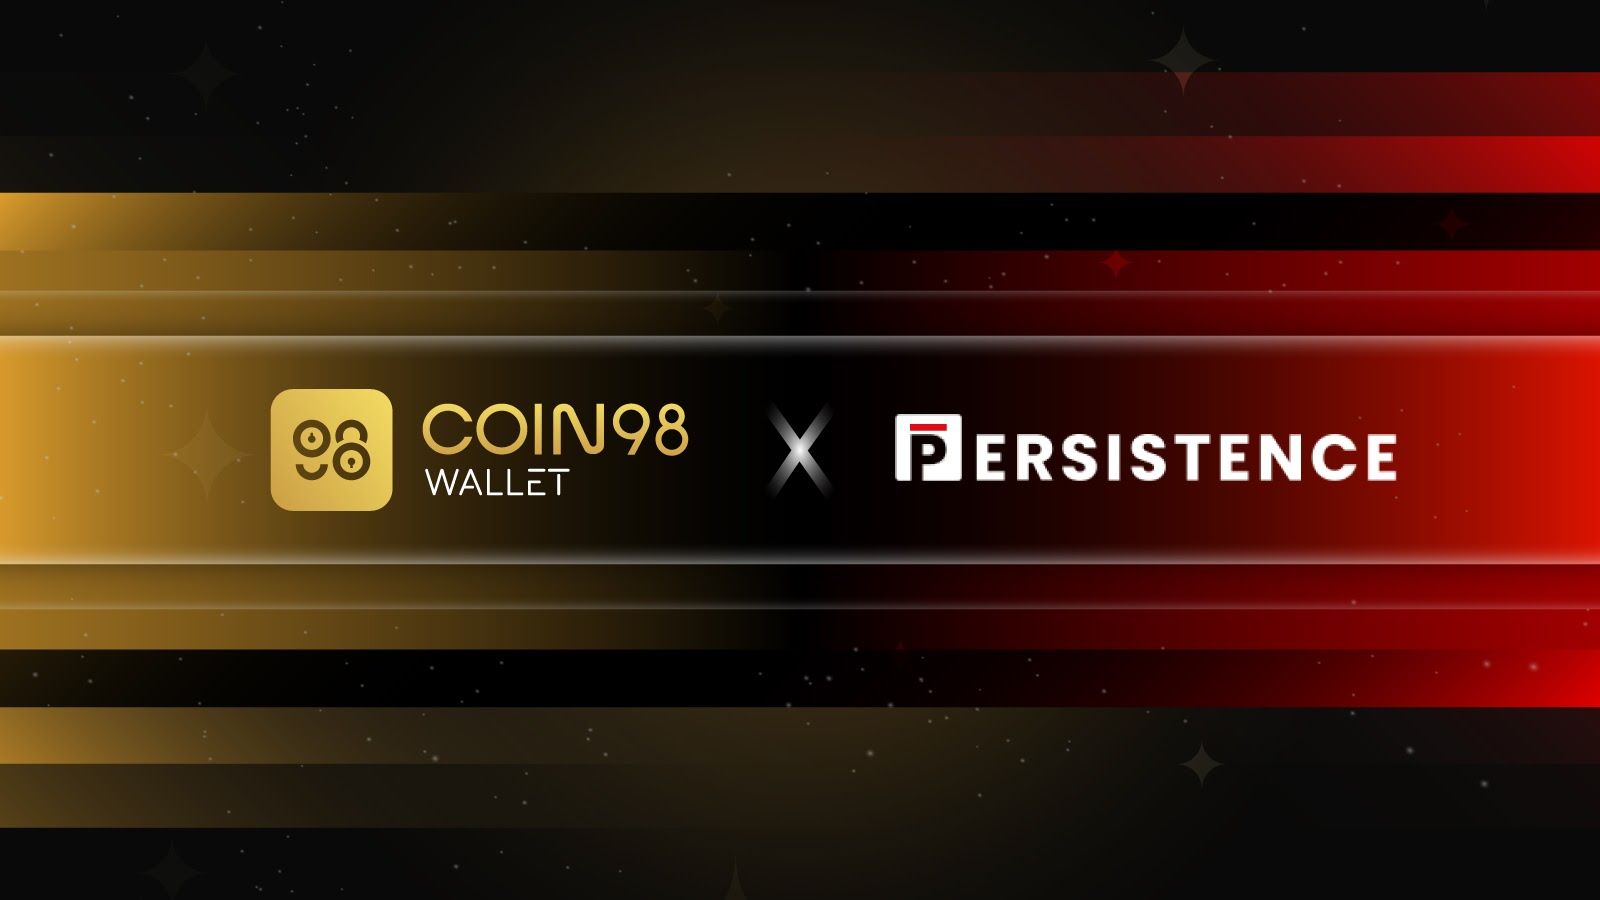 Coin98 Wallet reaches closer to a seamless DeFi real-world connection by integrating with Persistence